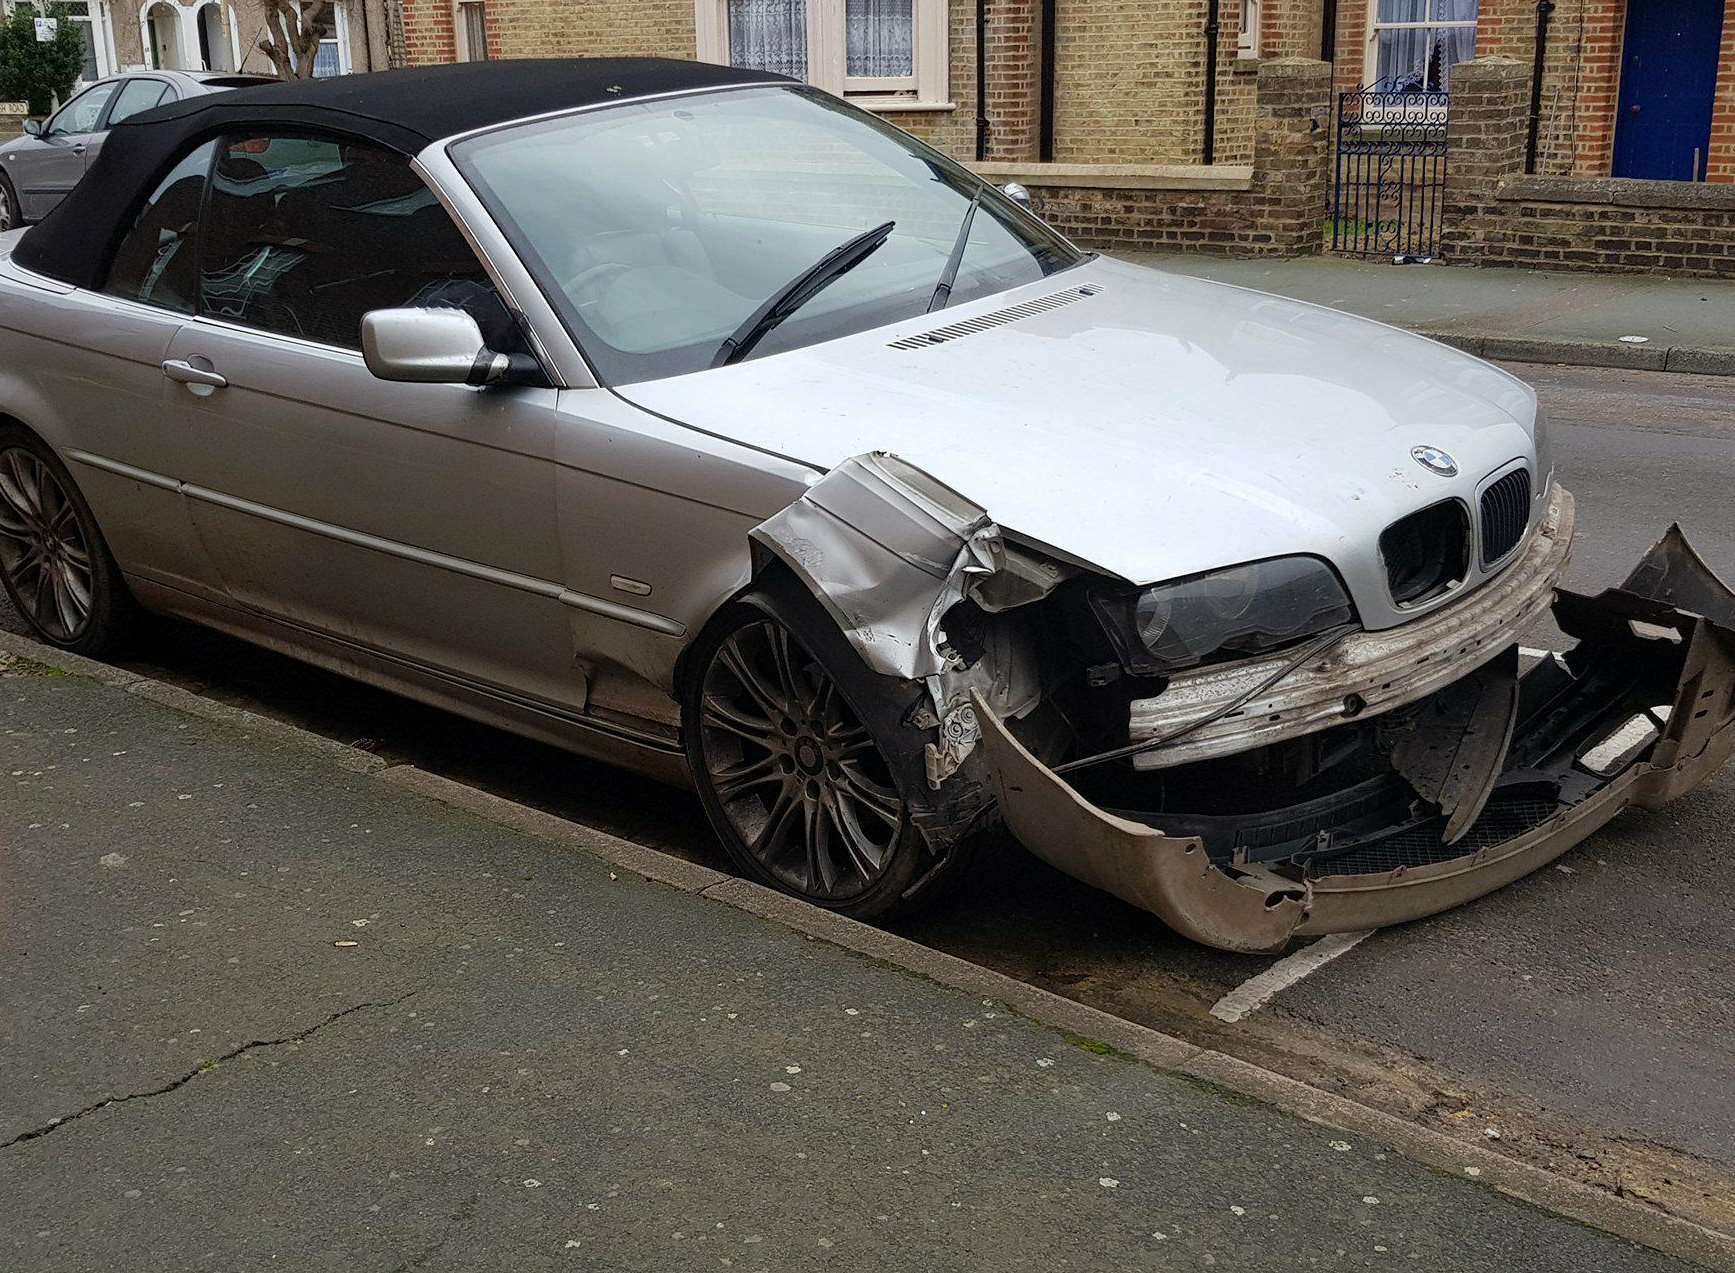 The silver BMW found in Cavendish Road